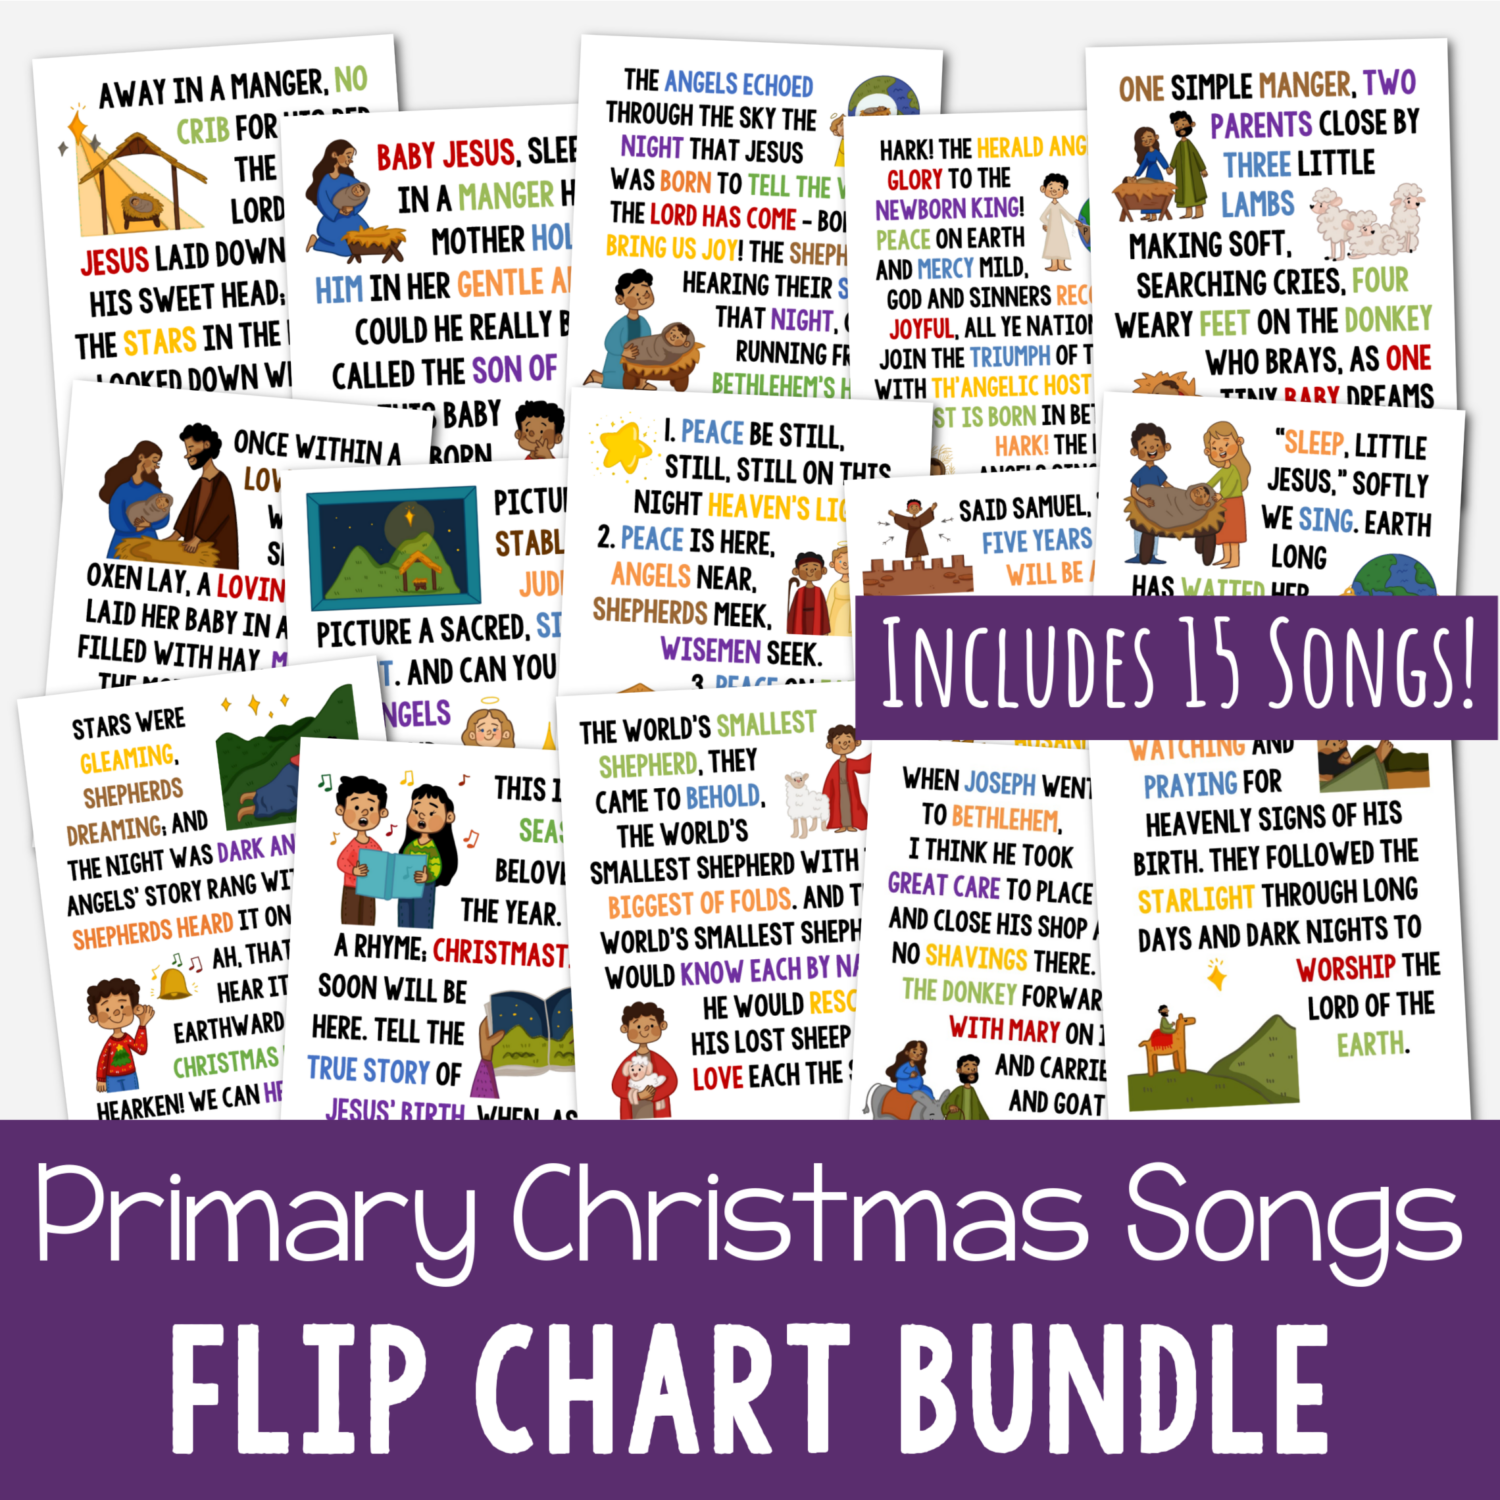 Primary Christmas Songs Flip Chart Bundle! Grab the custom art lyrics flipchart for 15 favorite songs to teach in Singing Time for LDS Primary music leaders and families this holiday season including: - Away in a Manger - Born to Be a King - Born to Bring Us Joy - Hark! The Herald Angels Sing - Little Lord Jesus - Once Within a Lowly Stable - Picture a Christmas - Prince of Peace - Samuel Tells of the Baby Jesus - Sleep Little Jesus - Stars Were Gleaming - The Nativity Song - The World's Smallest Shepherd - When Joseph Went to Bethlehem - When We Seek Him